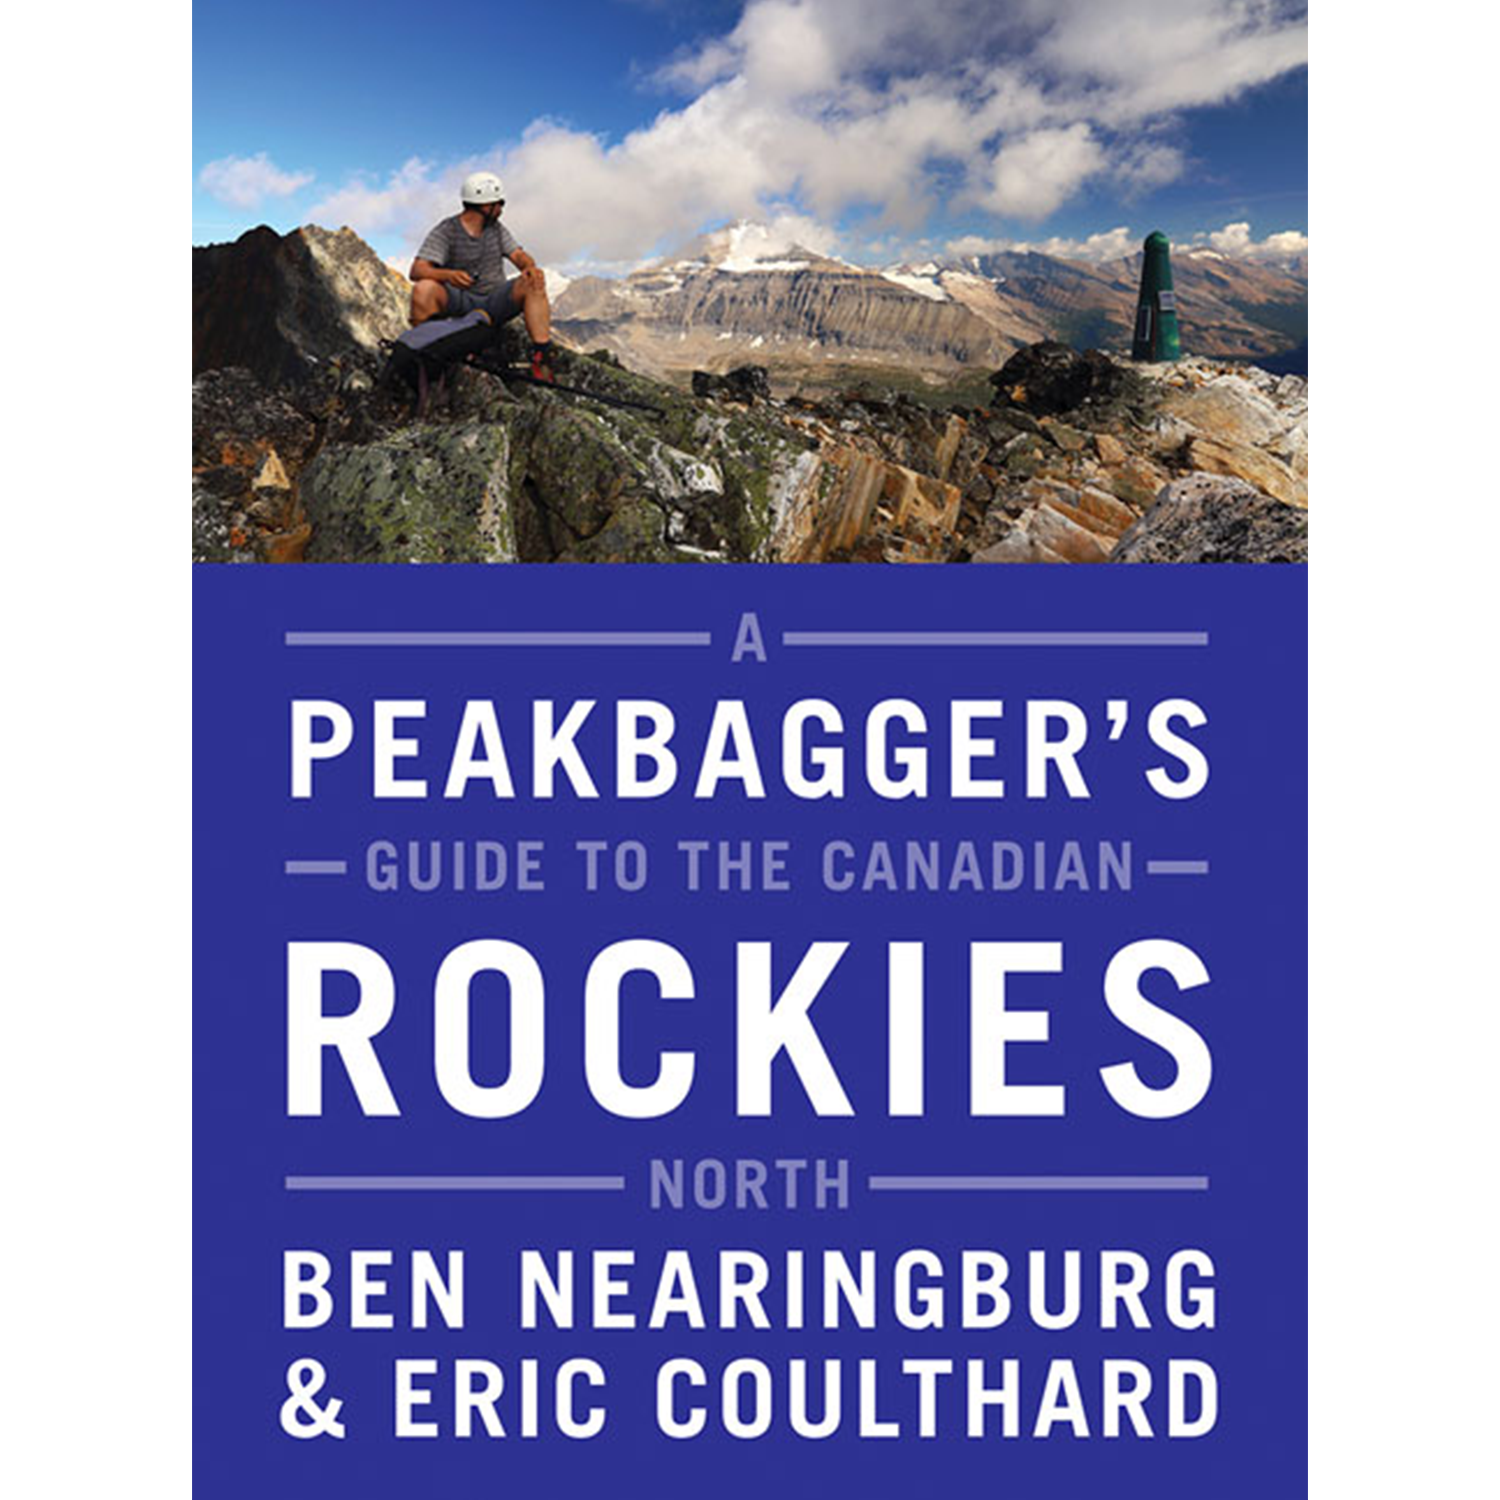 A Peakbagger's Guide to the Canadian Rockies: North